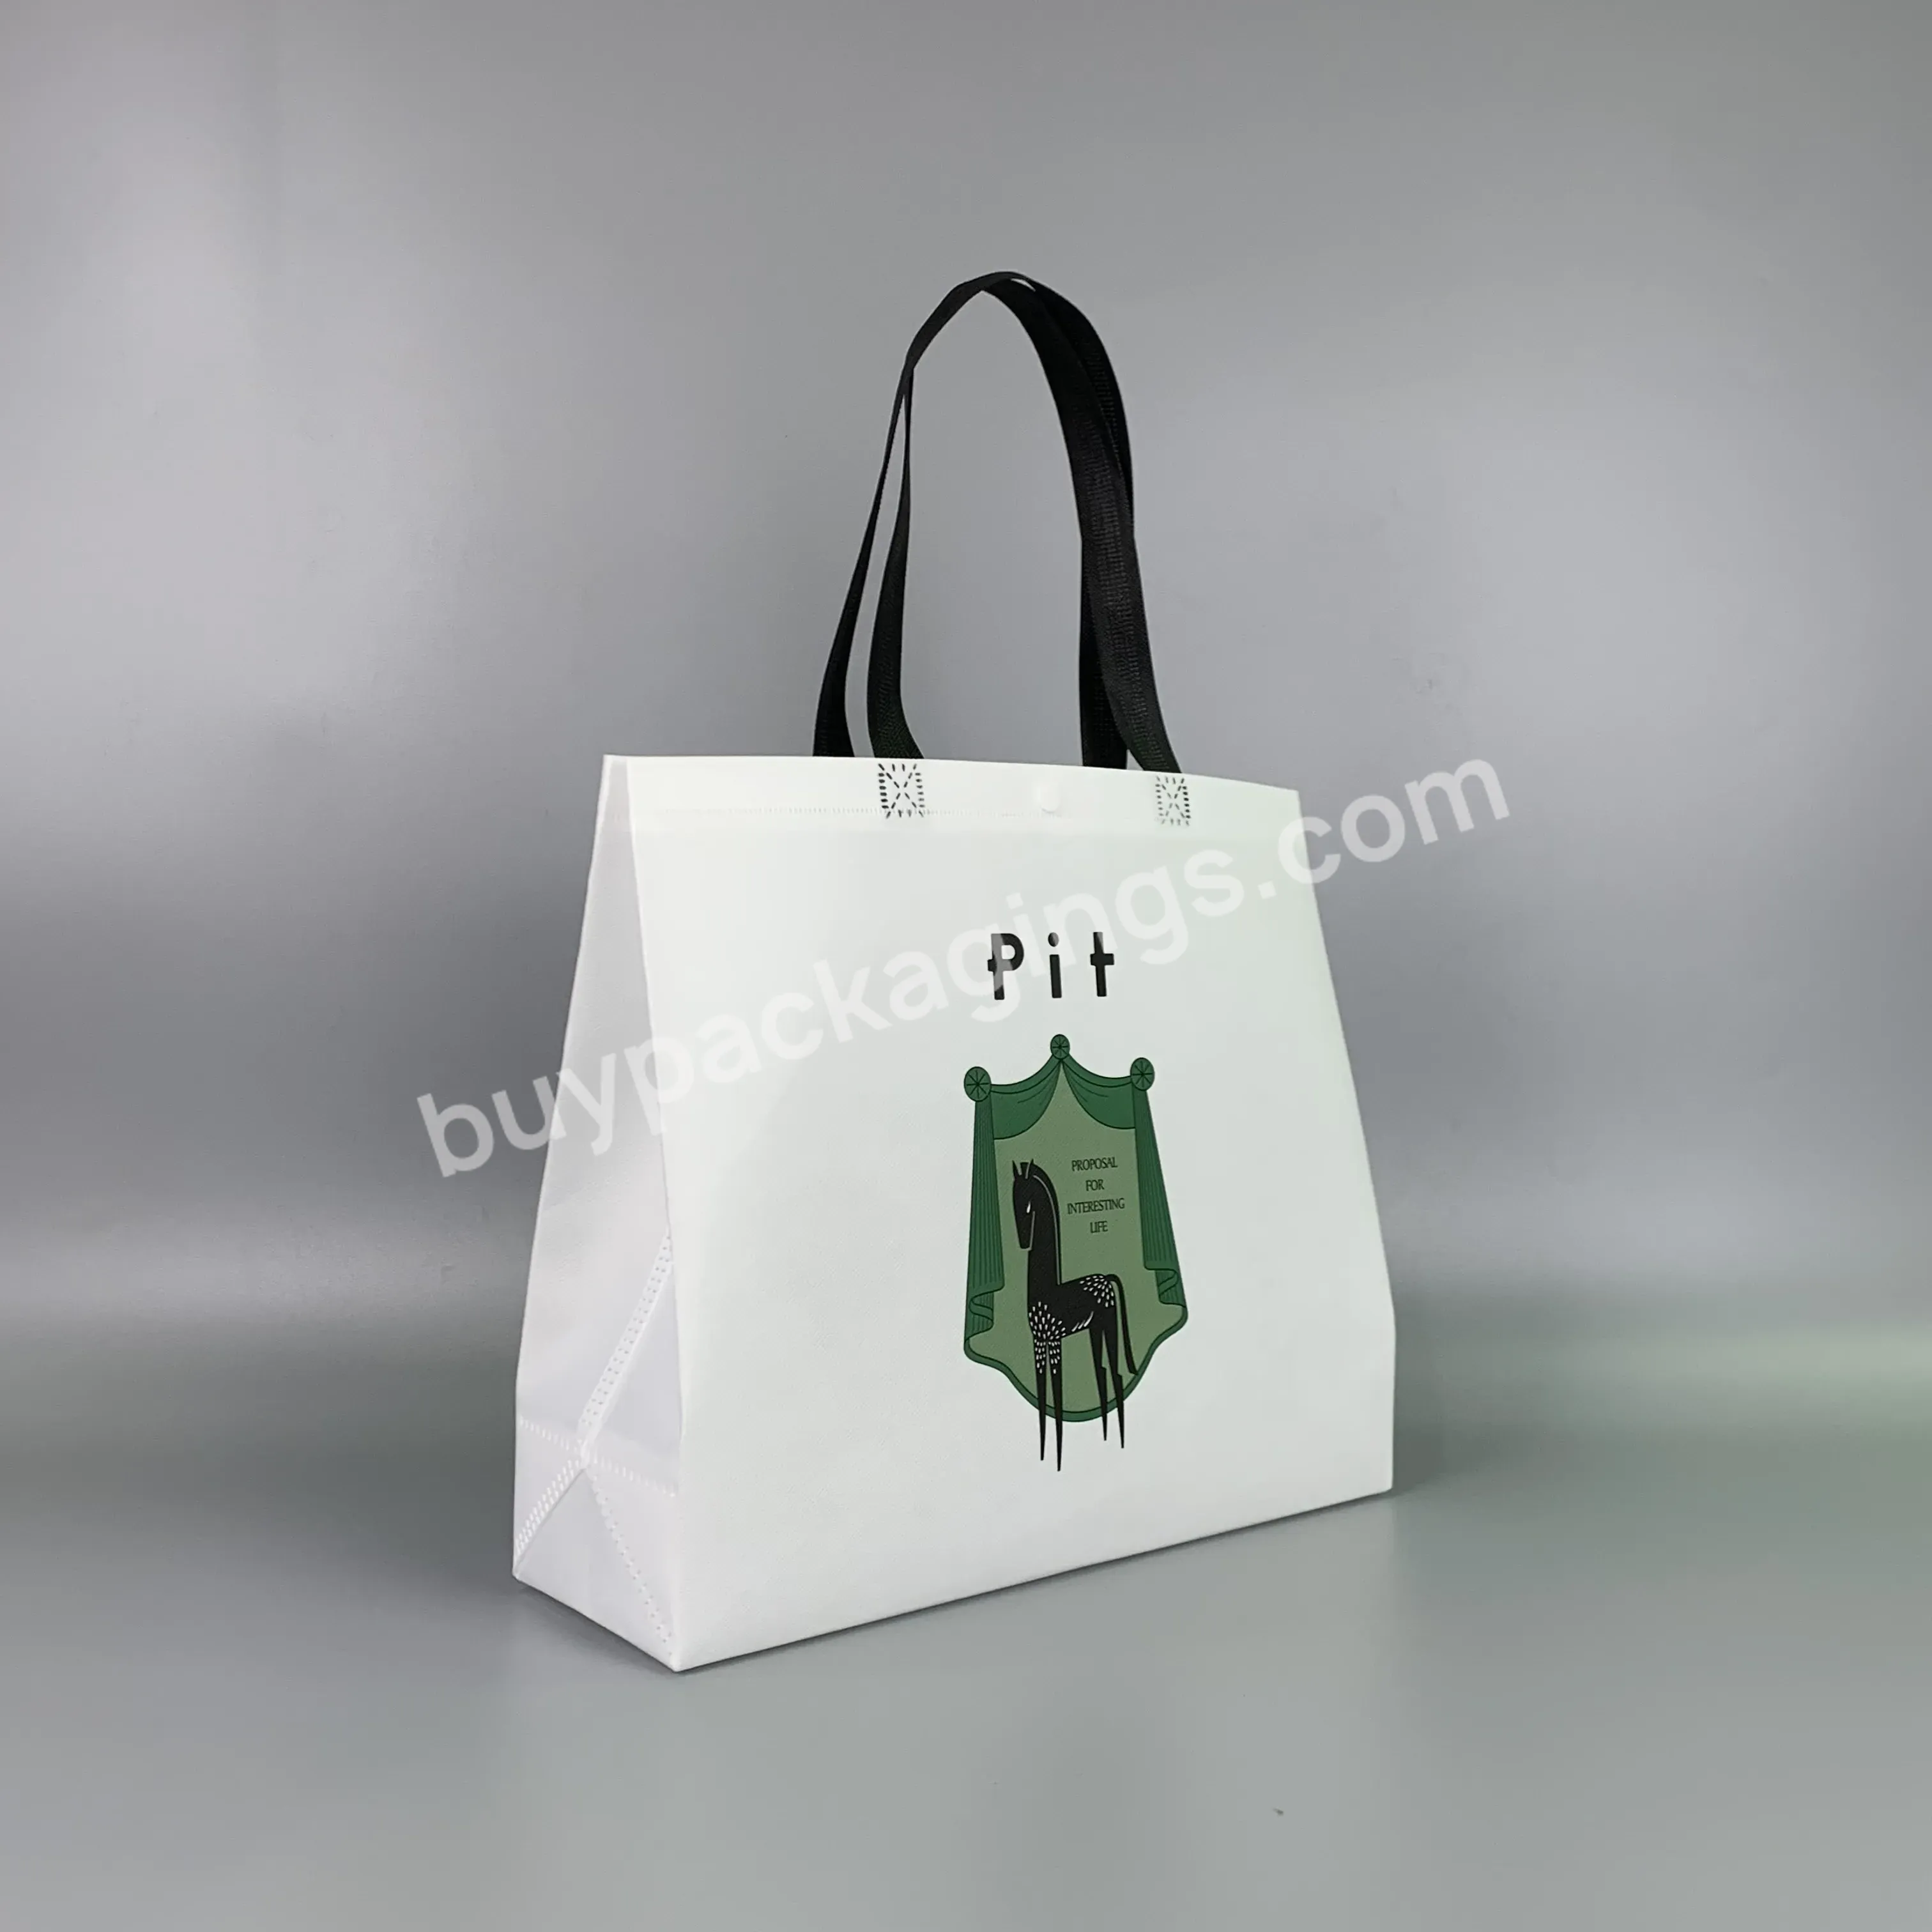 China Supplier Recycle Customized Printing Colorful Foldable Eco-friendly Fashionable Bag Non Woven Shopping Bag - Buy Tote Non Woven Bags,Non Woven Bags For Shopping,Eco Friendly Non Woven Bags.